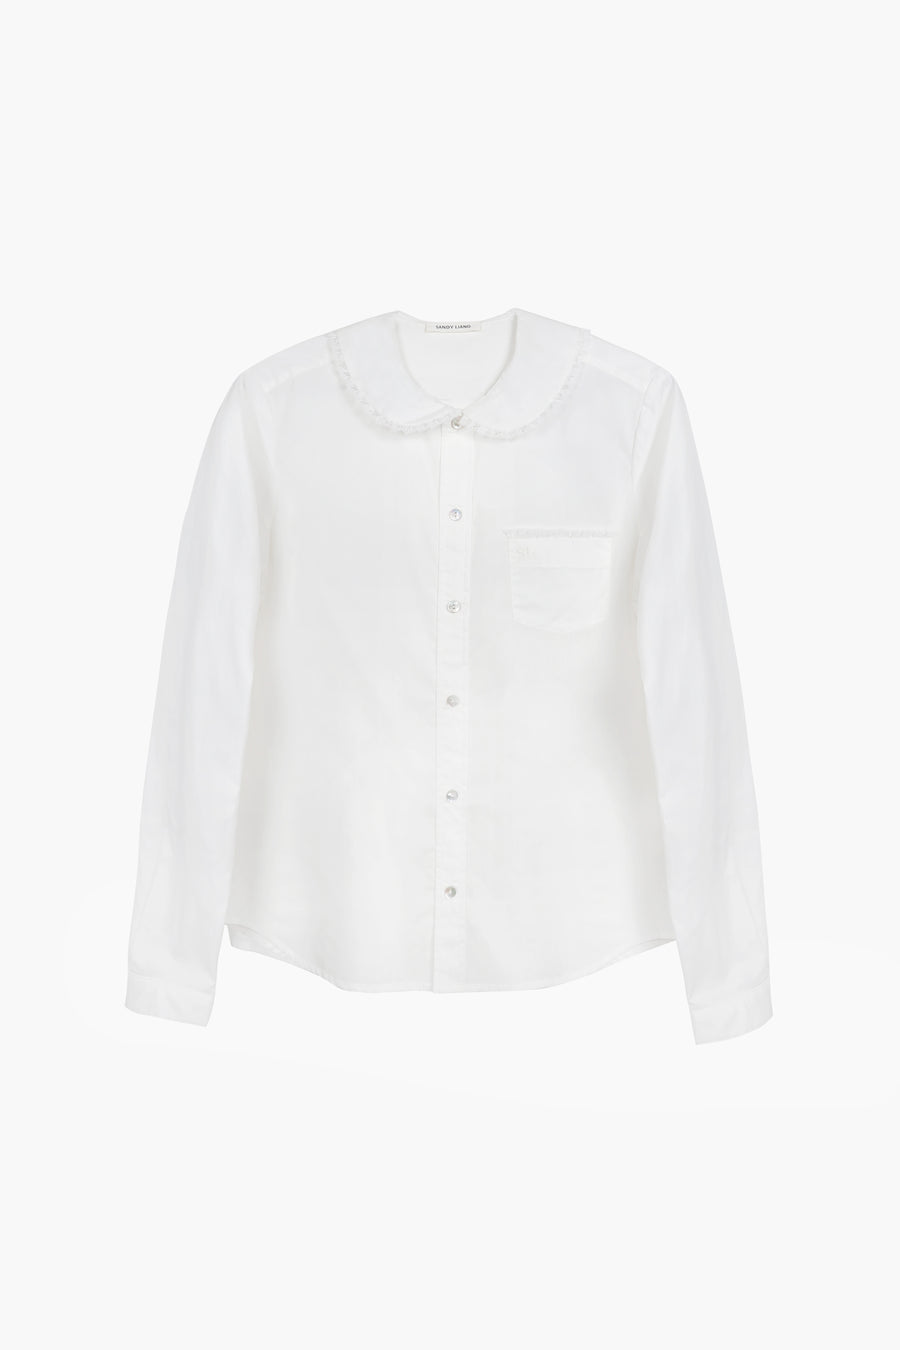 Long sleeve button up collared shirt with lace detail in white